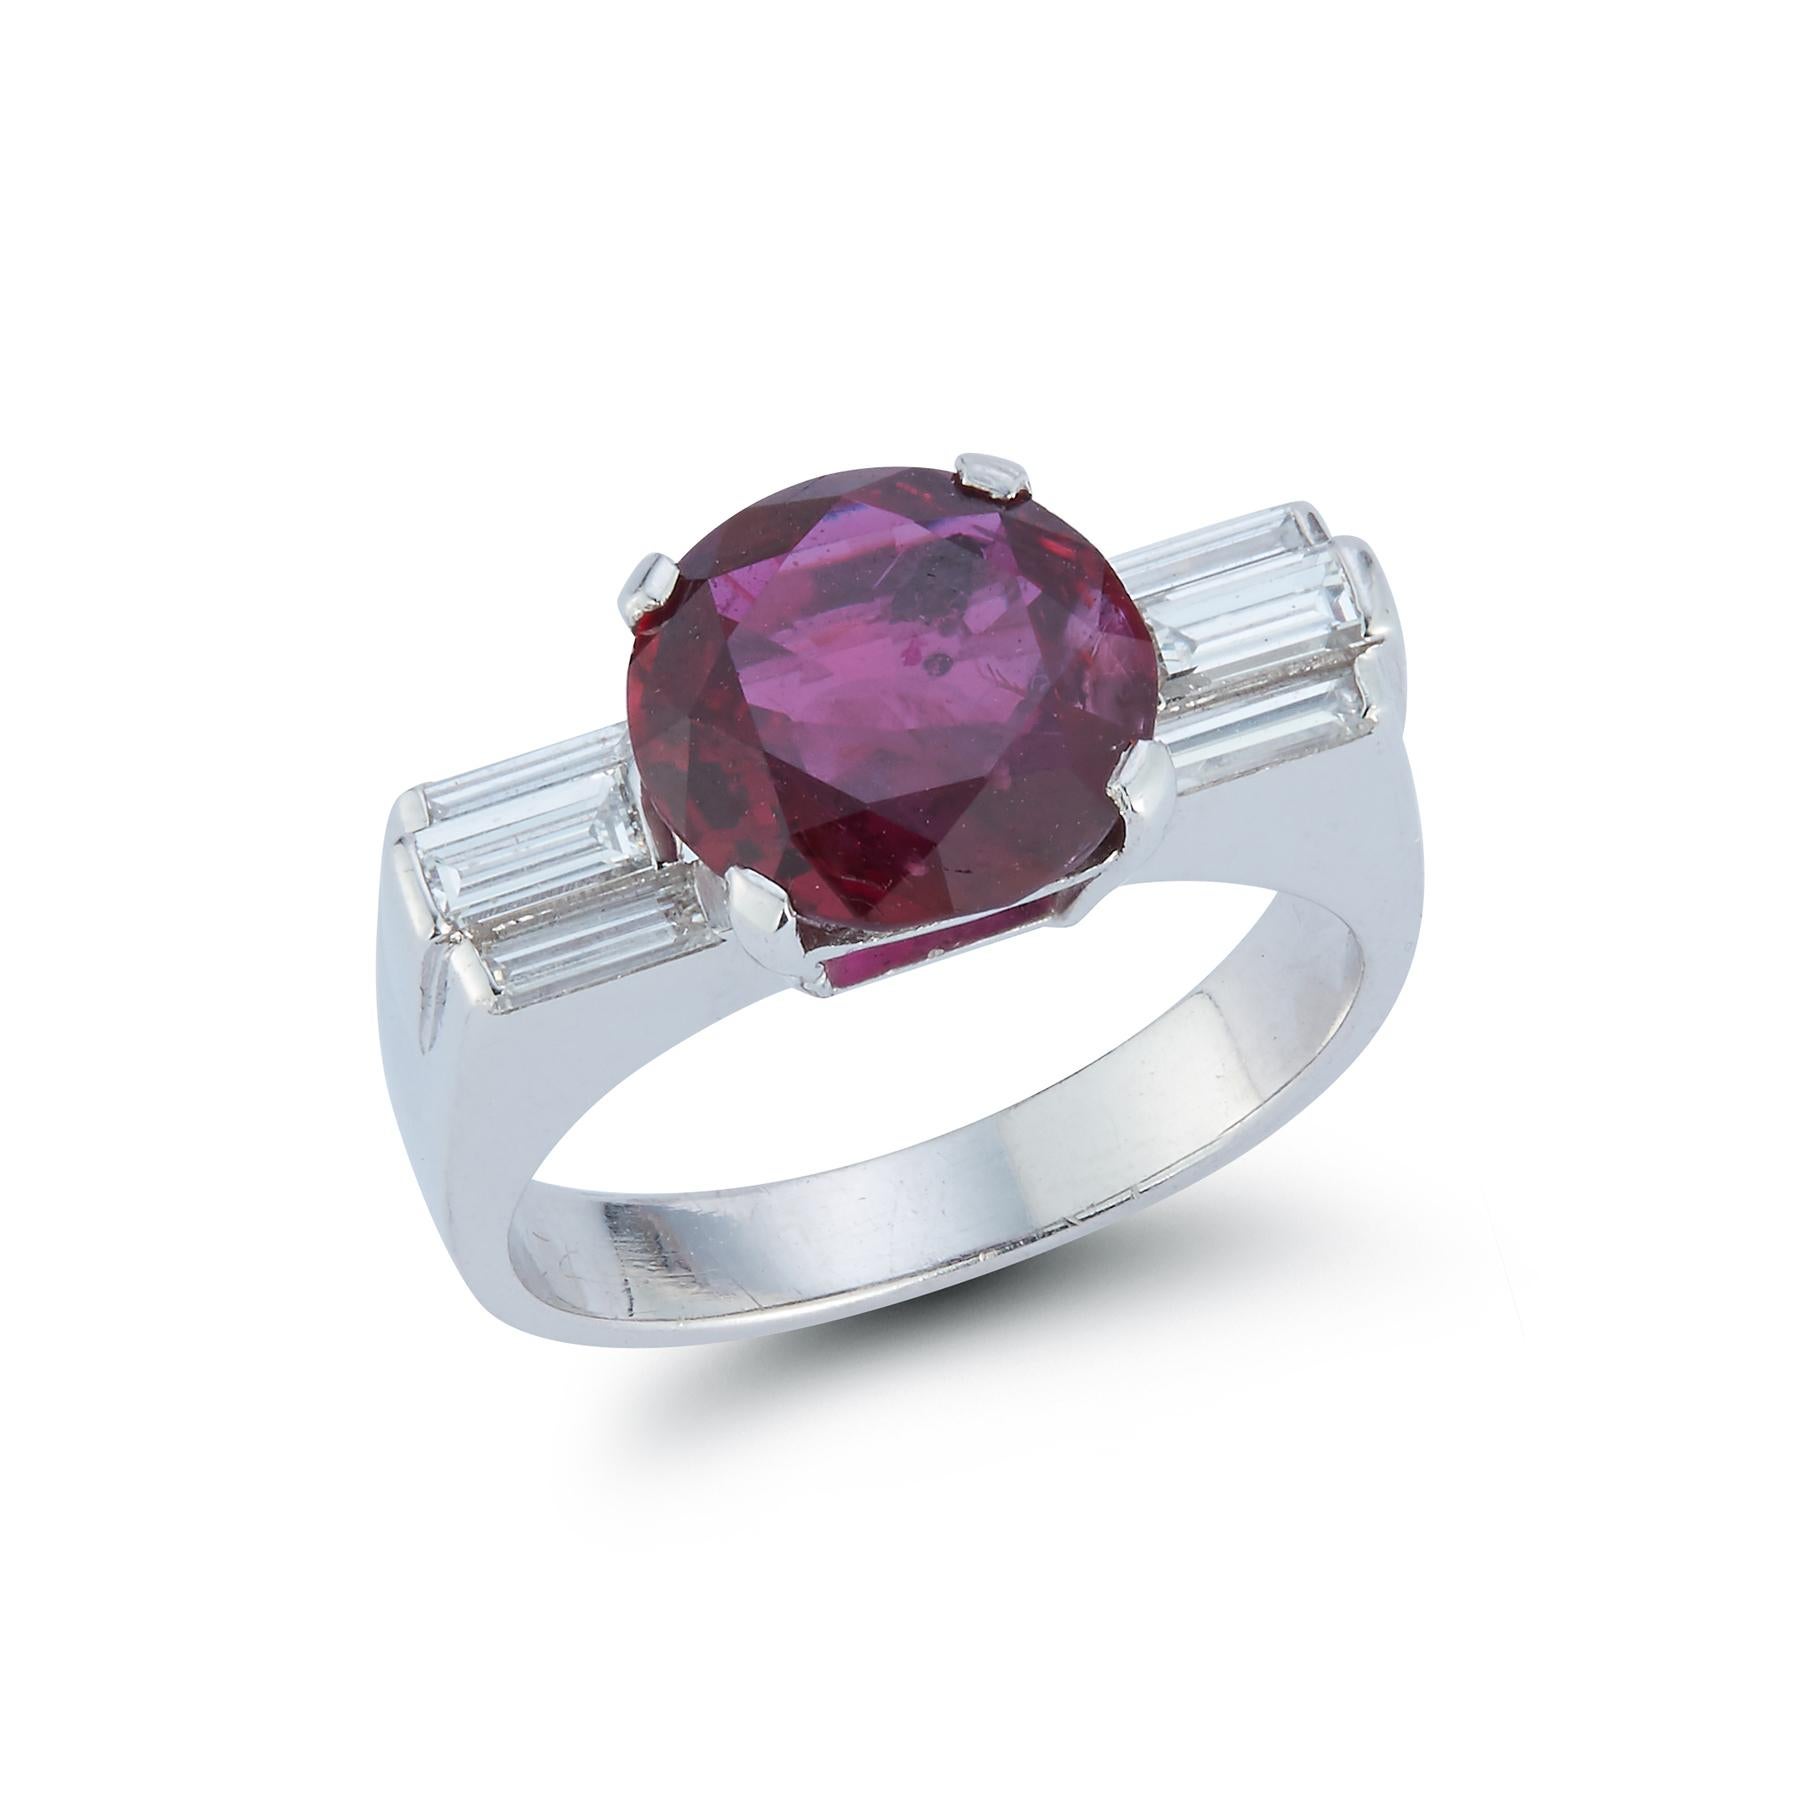 Ruby And Diamond Ring Set in Platinum
Ruby Weight: 3.65 Cts
Diamond Weight: .50 Cts 
Ring Size: 6
Re-sizable Free Of Charge 